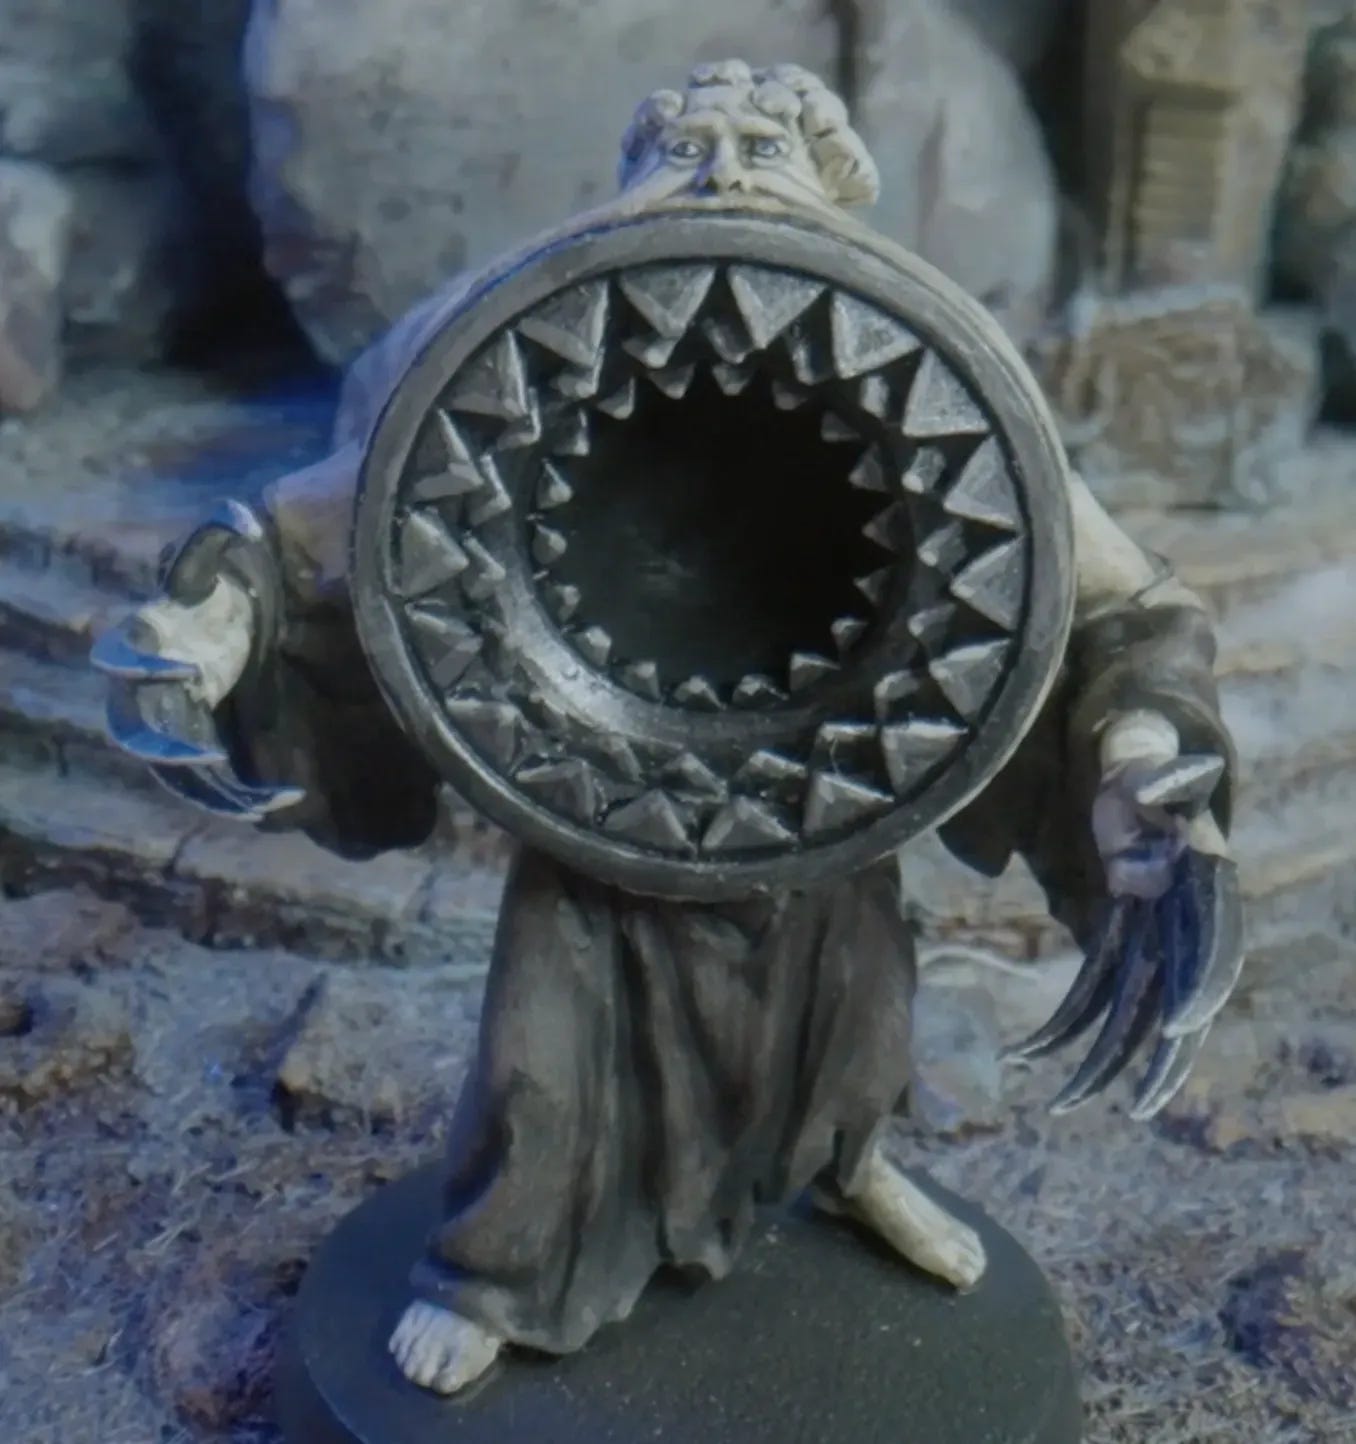 a particularly terrifying mini with rows of teeth instead of a torso.